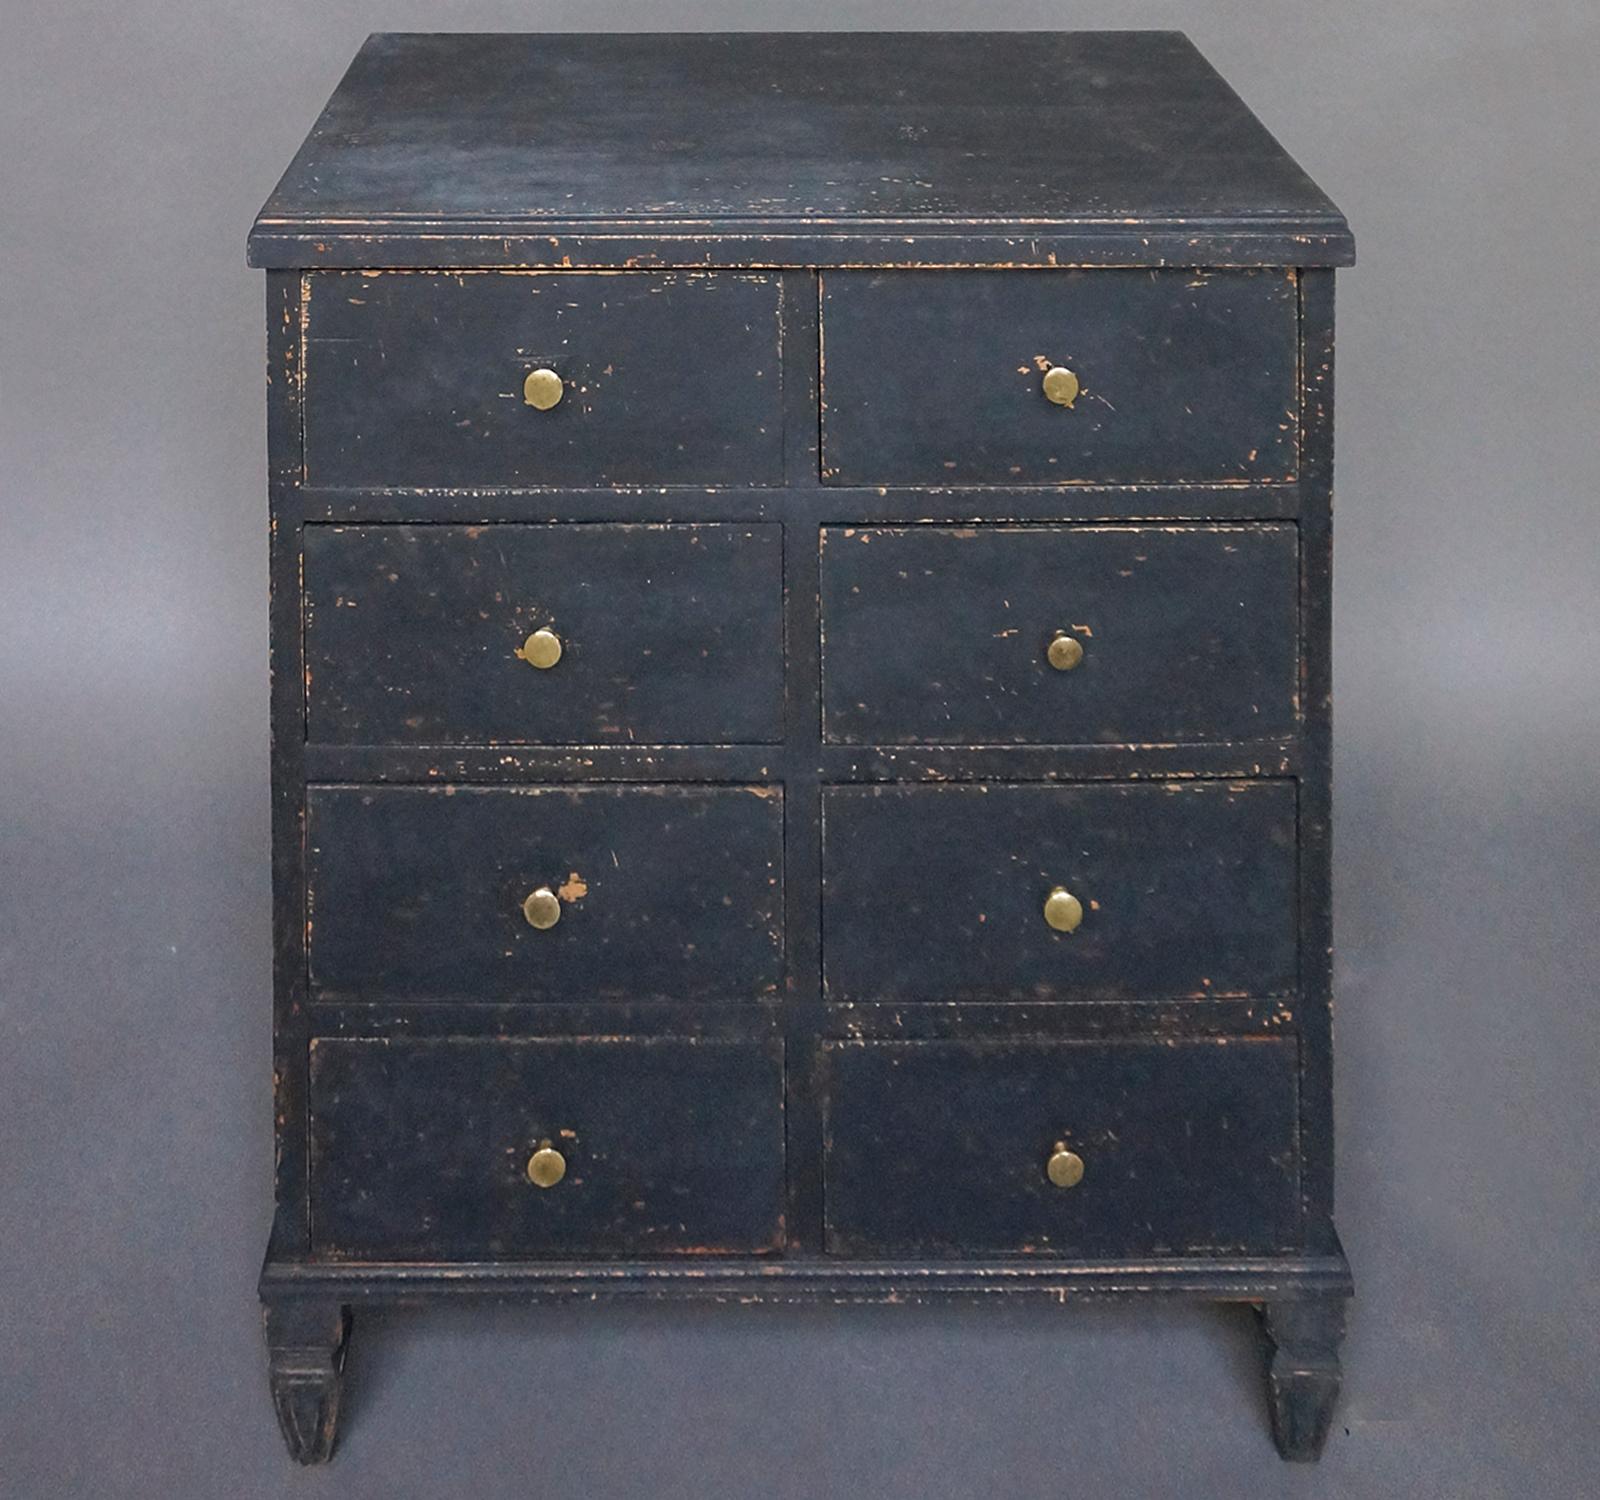 Rare chest of drawers, Sweden circa 1880, in black paint. Eight half-width drawers in a simple case with tapered and reeded feet. Brass pulls on each drawer.